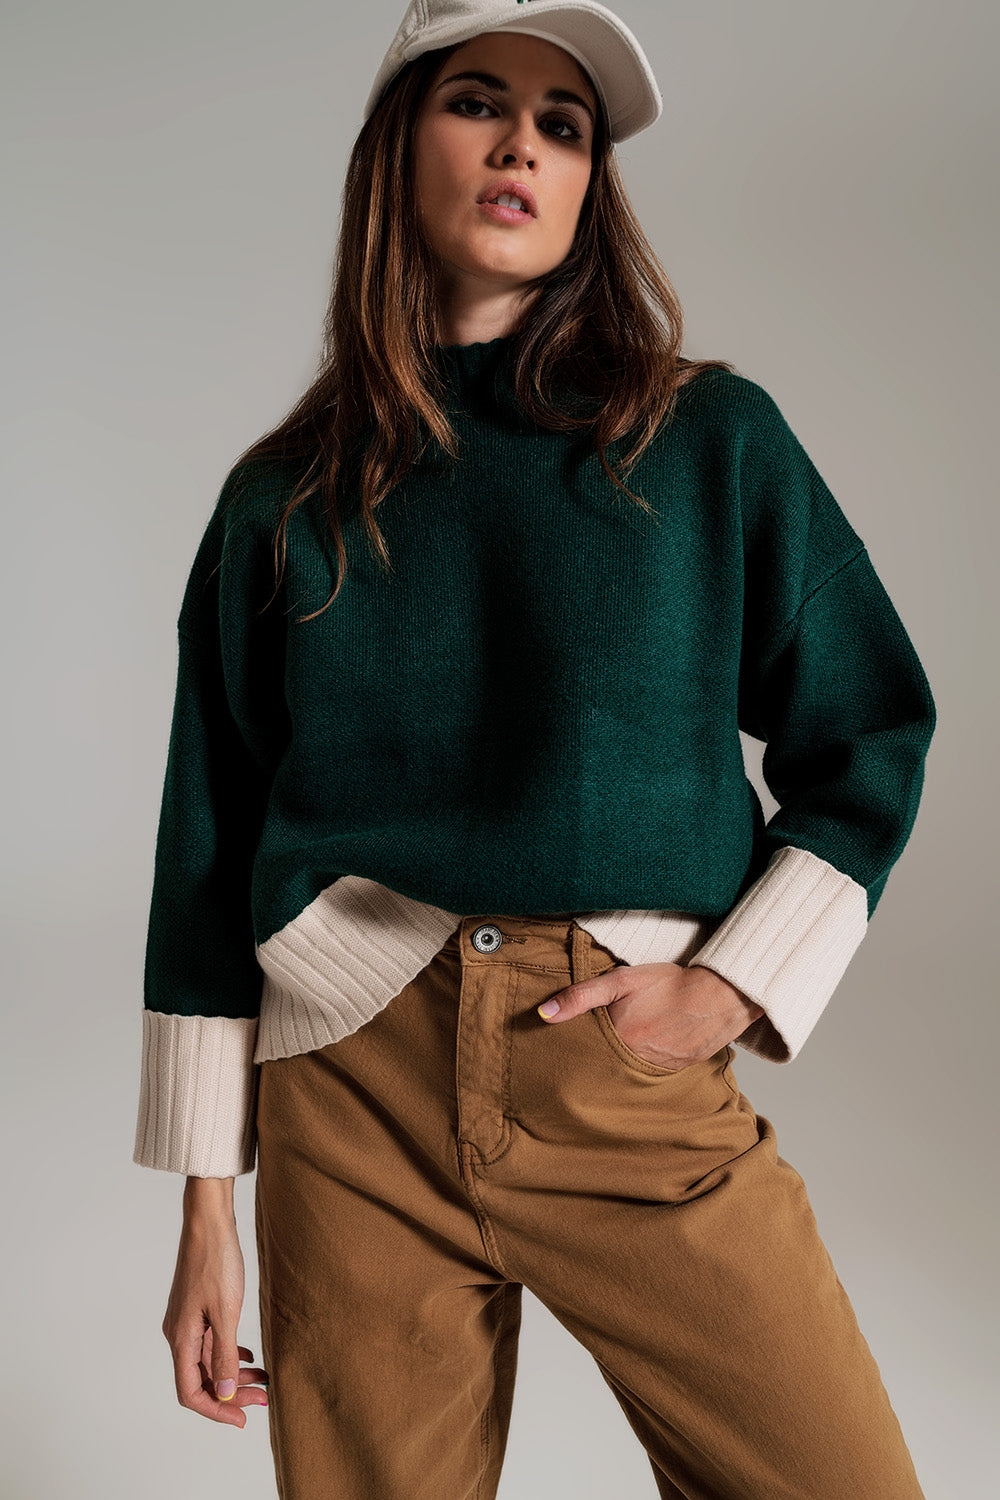 Q2 green jumper with white ribbed cuffs and hem